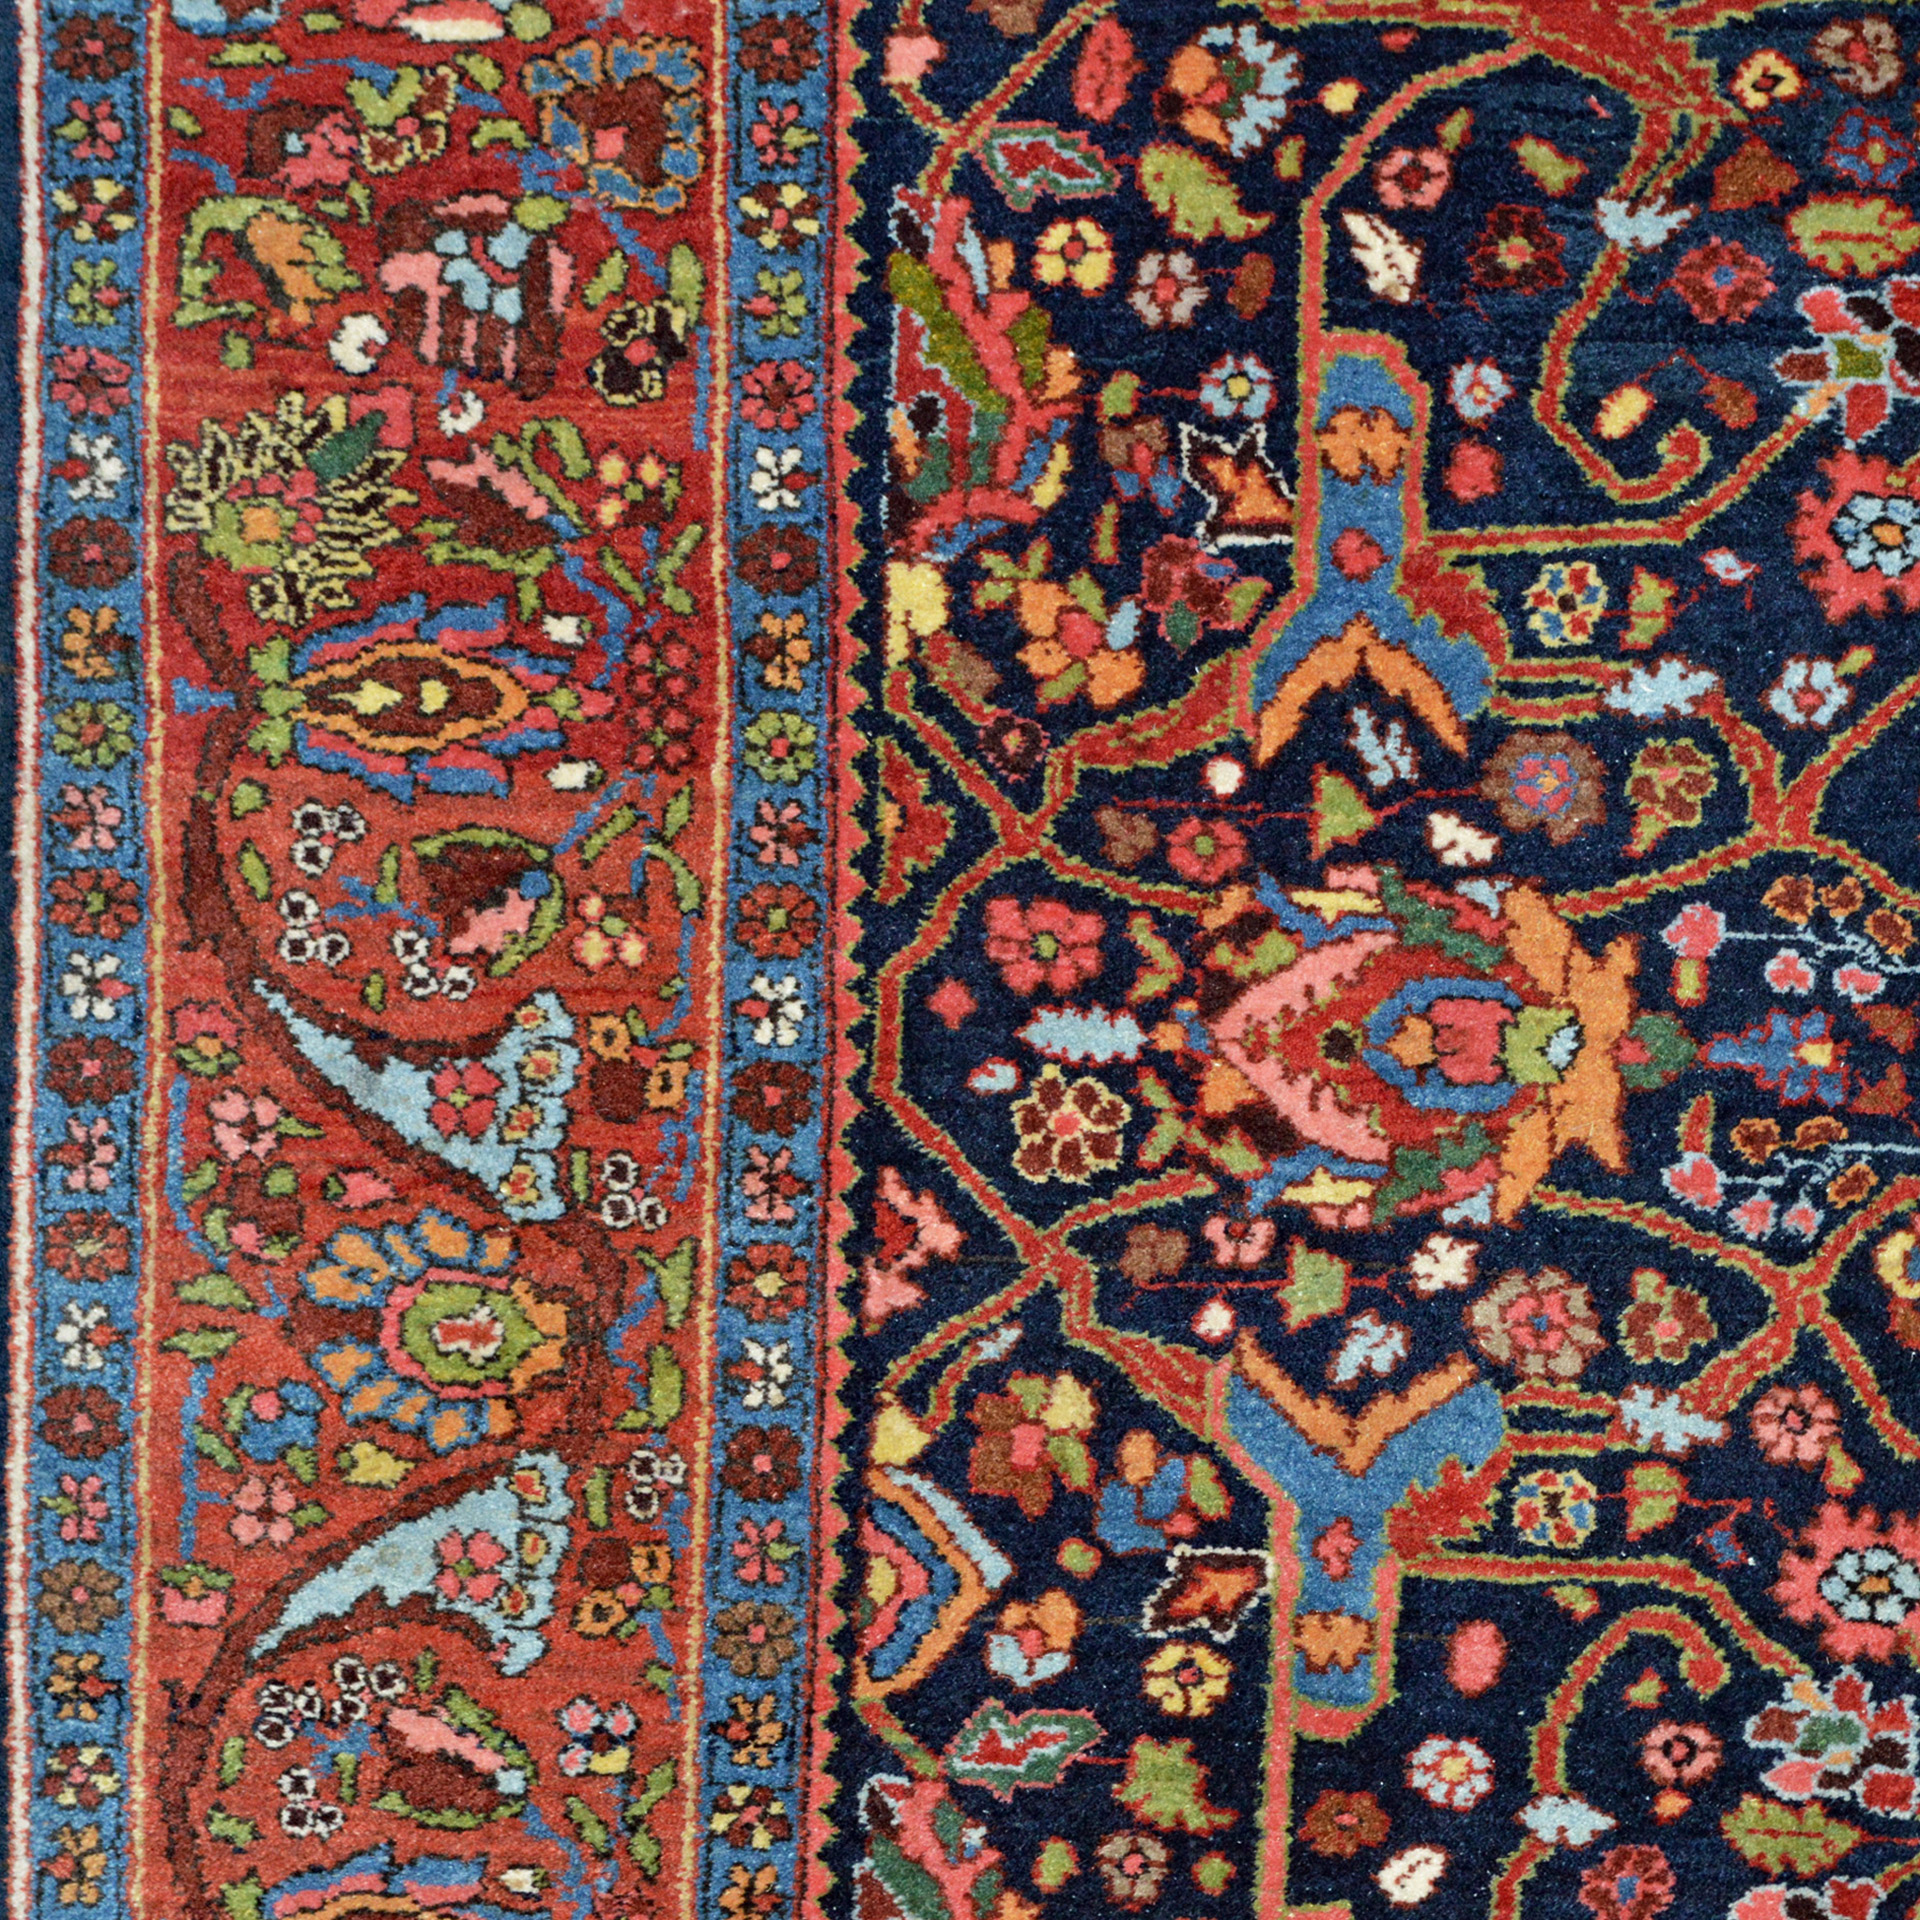 Red major border detail and navy blue field detail from an antique Bidjar rug with a version of the Split Arabesque design. Douglas Stock Gallery, antique run Boston,Ma area